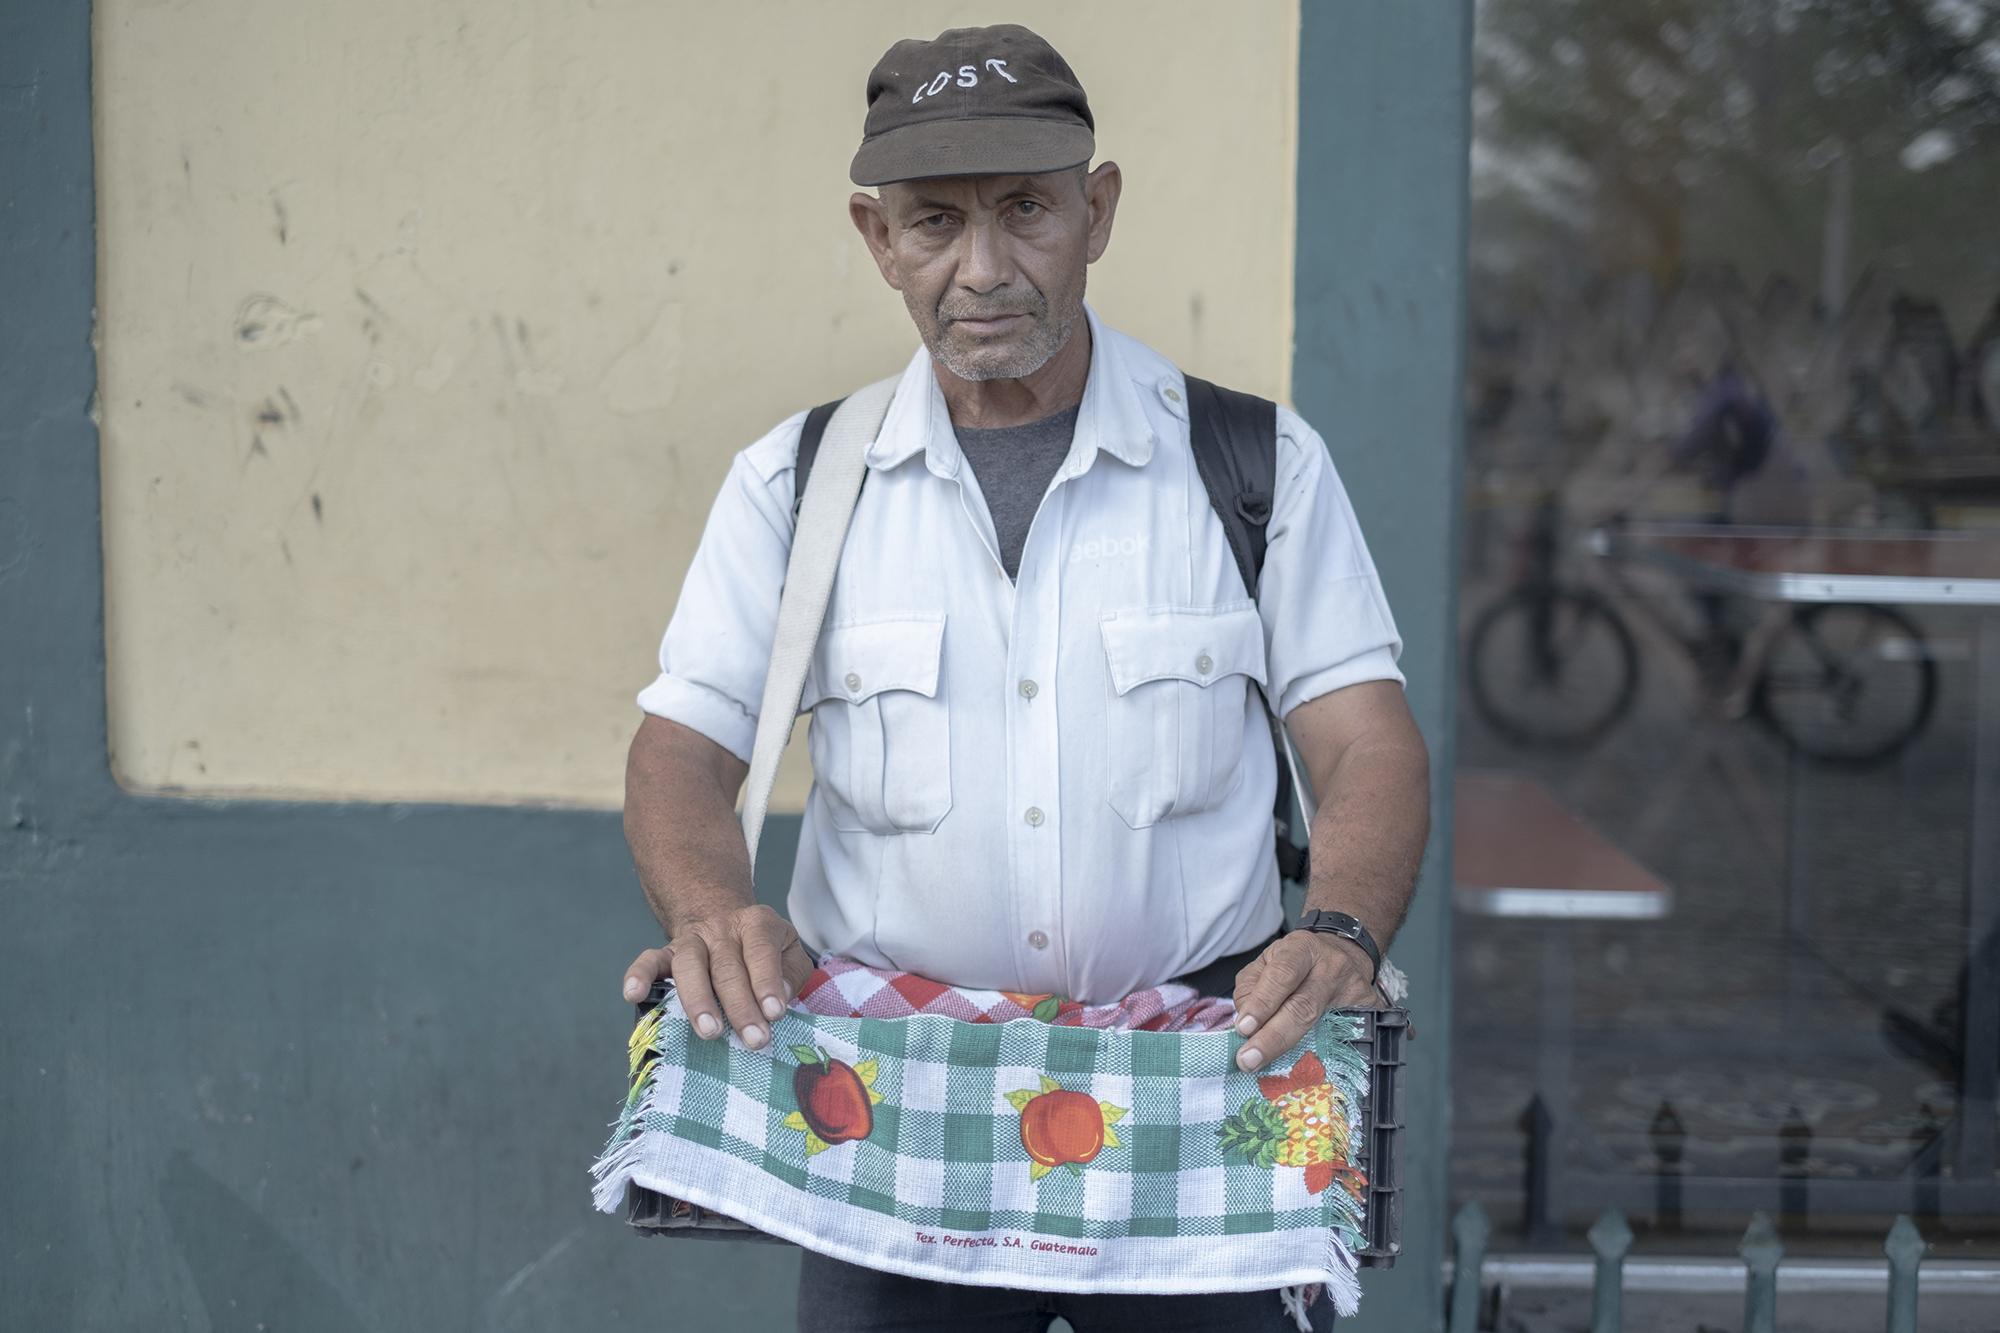 José Alas, 57, sells candy and cigarettes downtown. He almost always makes $5 per day, $3 of which go to paying for housing. “If I don’t leave home, I can’t work to pay my rent—even worse, I won’t eat. Necessity makes you work,” he said.